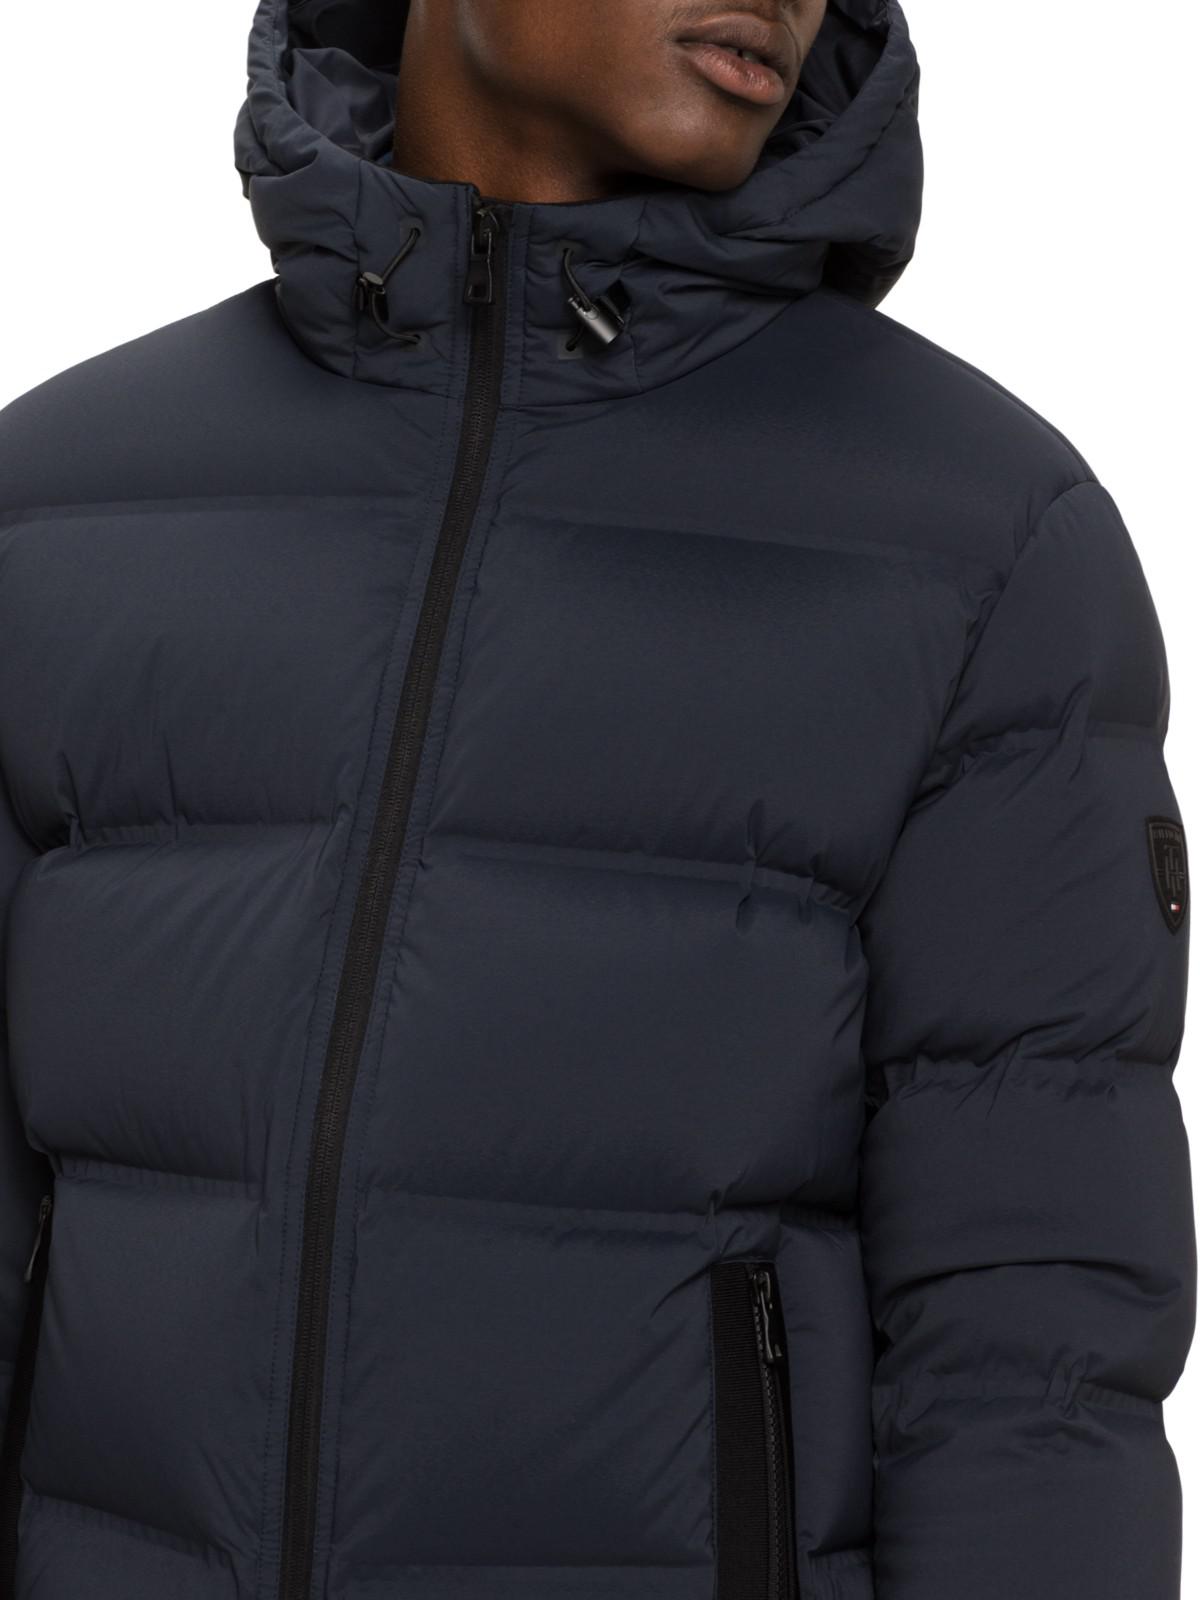 Tommy Hilfiger Maddy Down Bomber Jacket Store, 59% OFF | empow-her.com